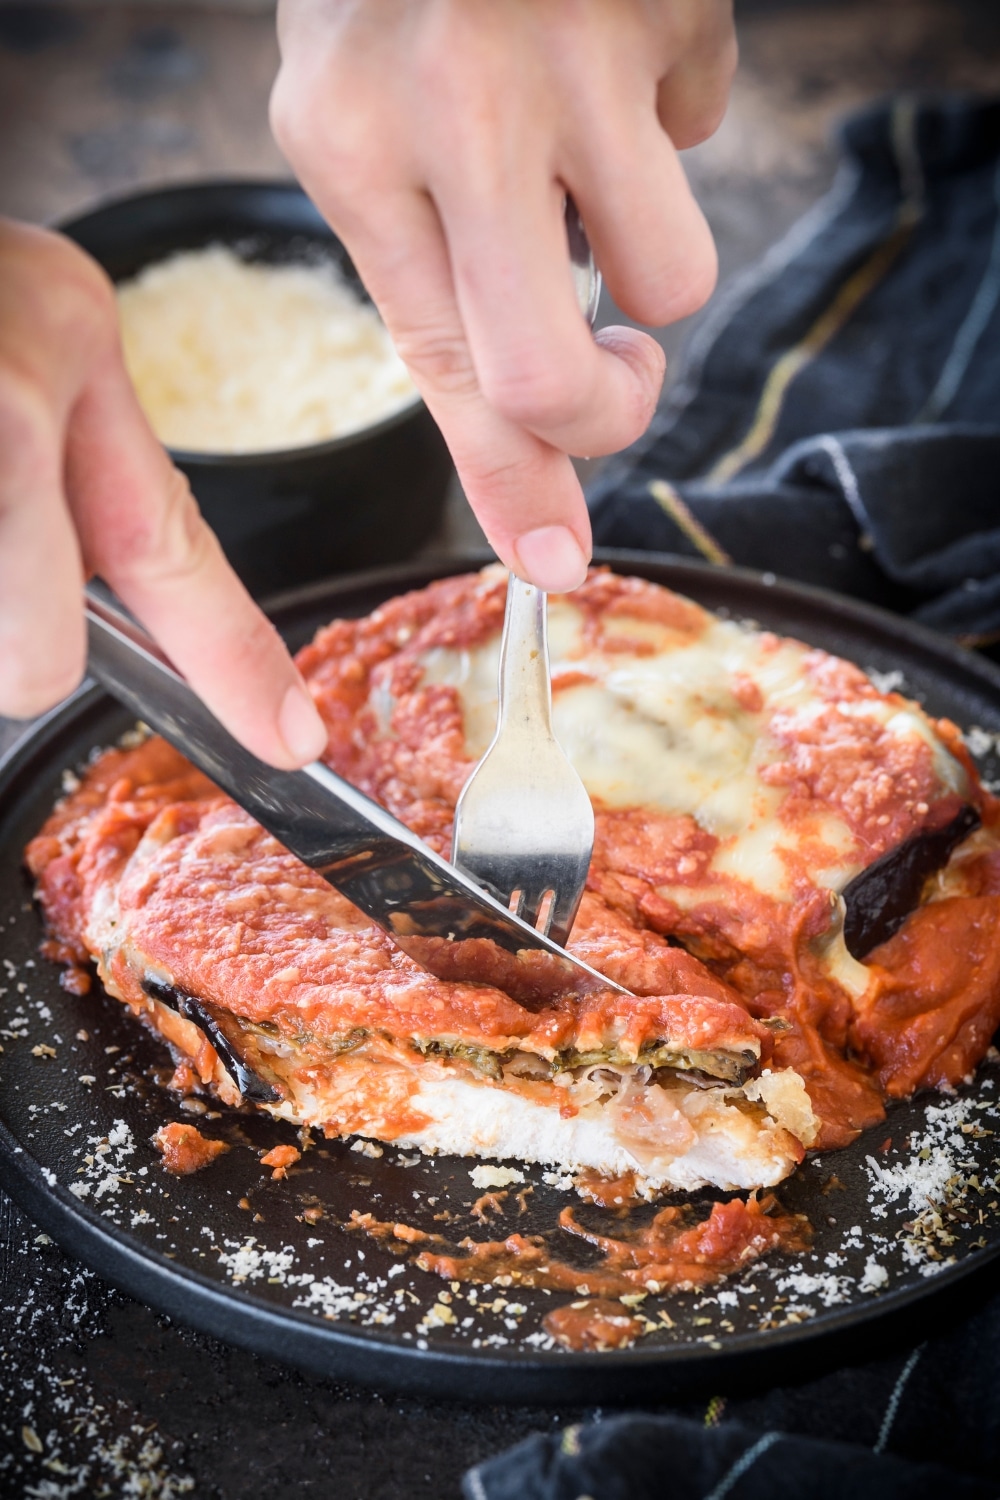 A plate with two chicken breasts covered in red sauce, sliced eggplant, and melted cheese. One chicken breast is being cut using a fork and knife.